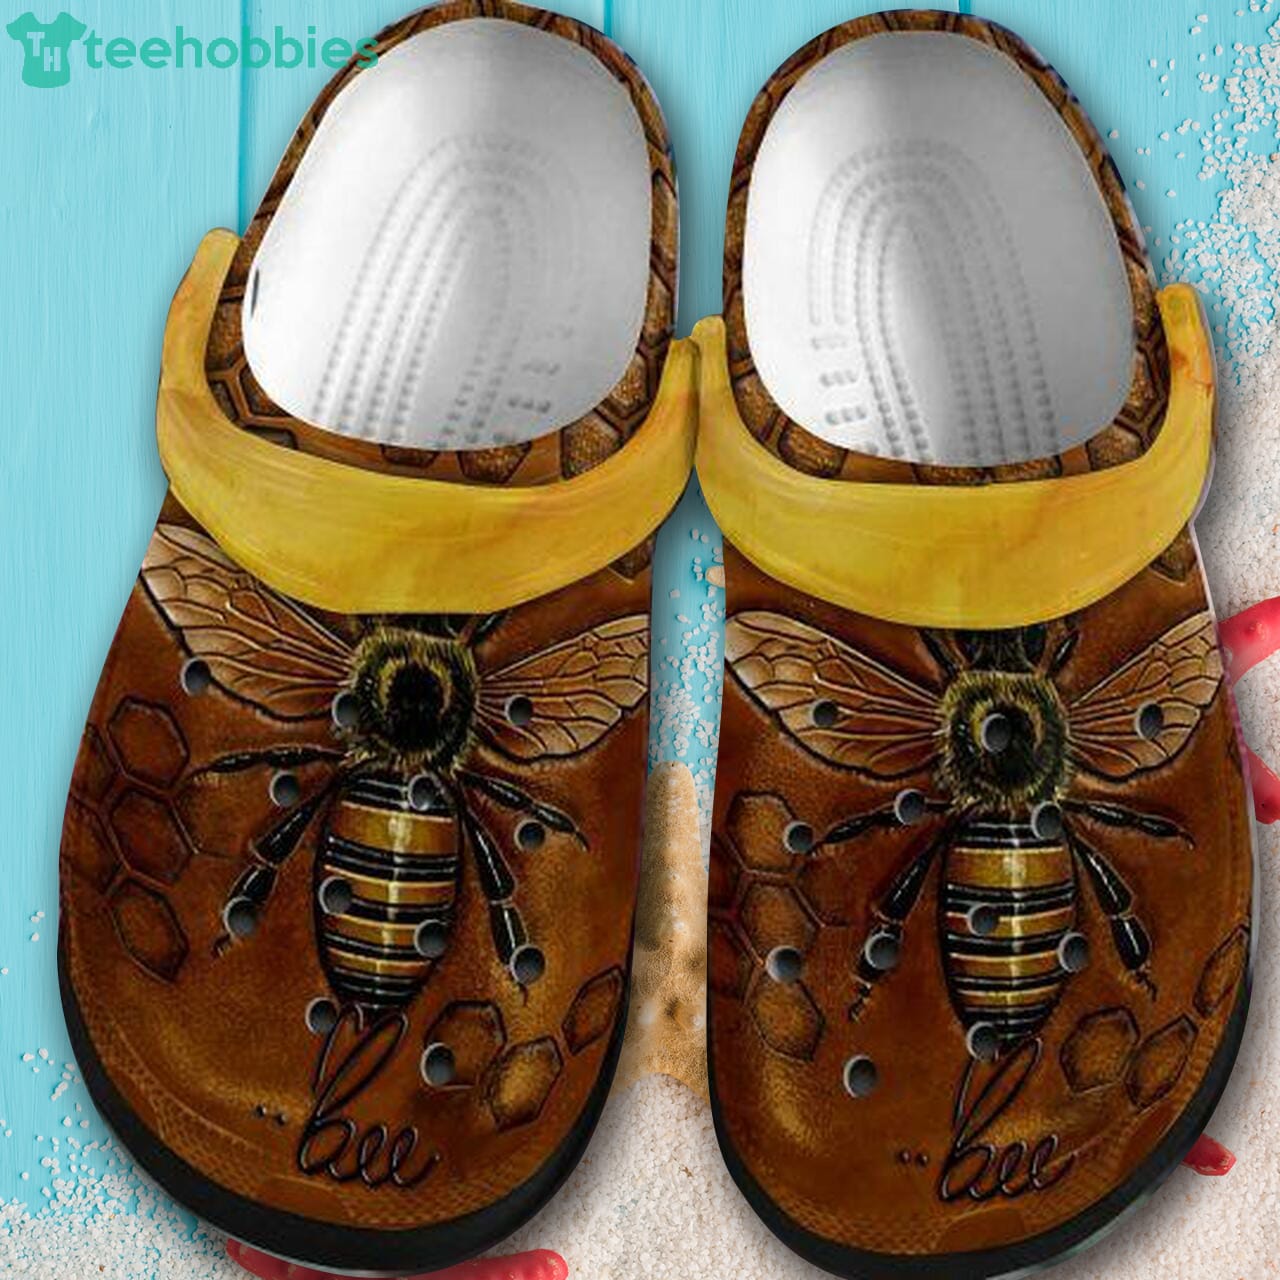 Bee Leather Pattern Unisex Clog Shoes For Women, Men